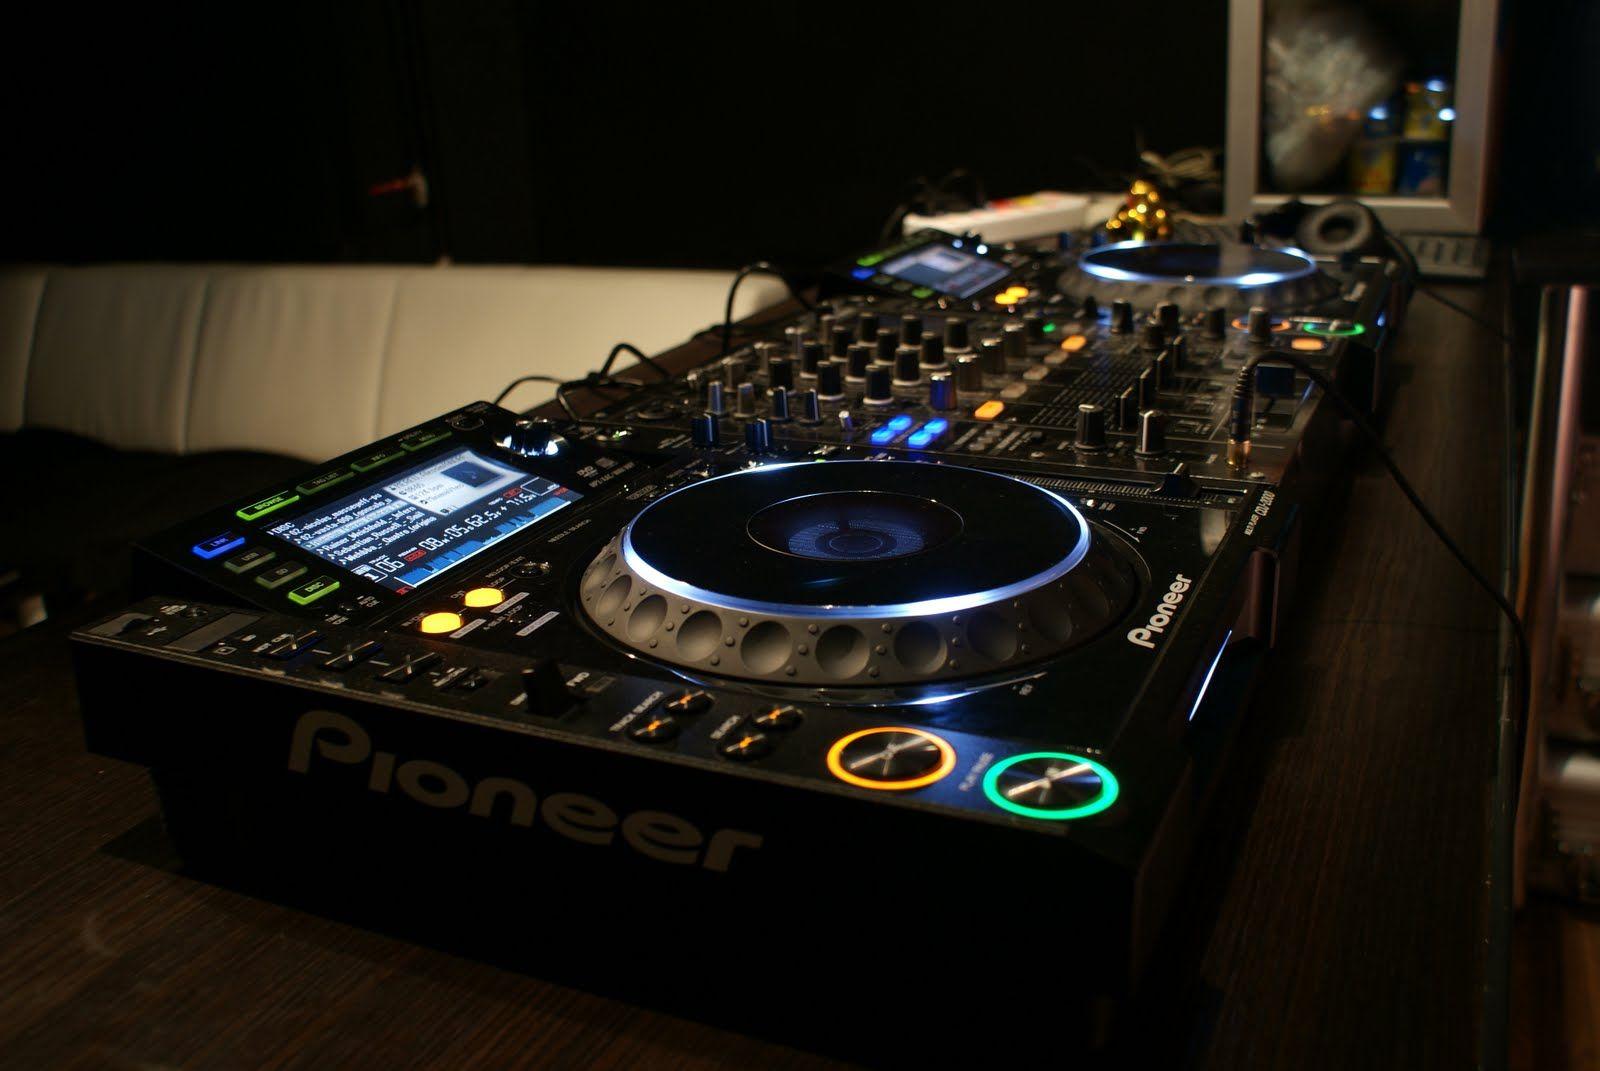 What Will The Next Pioneer CDJ Look Like?